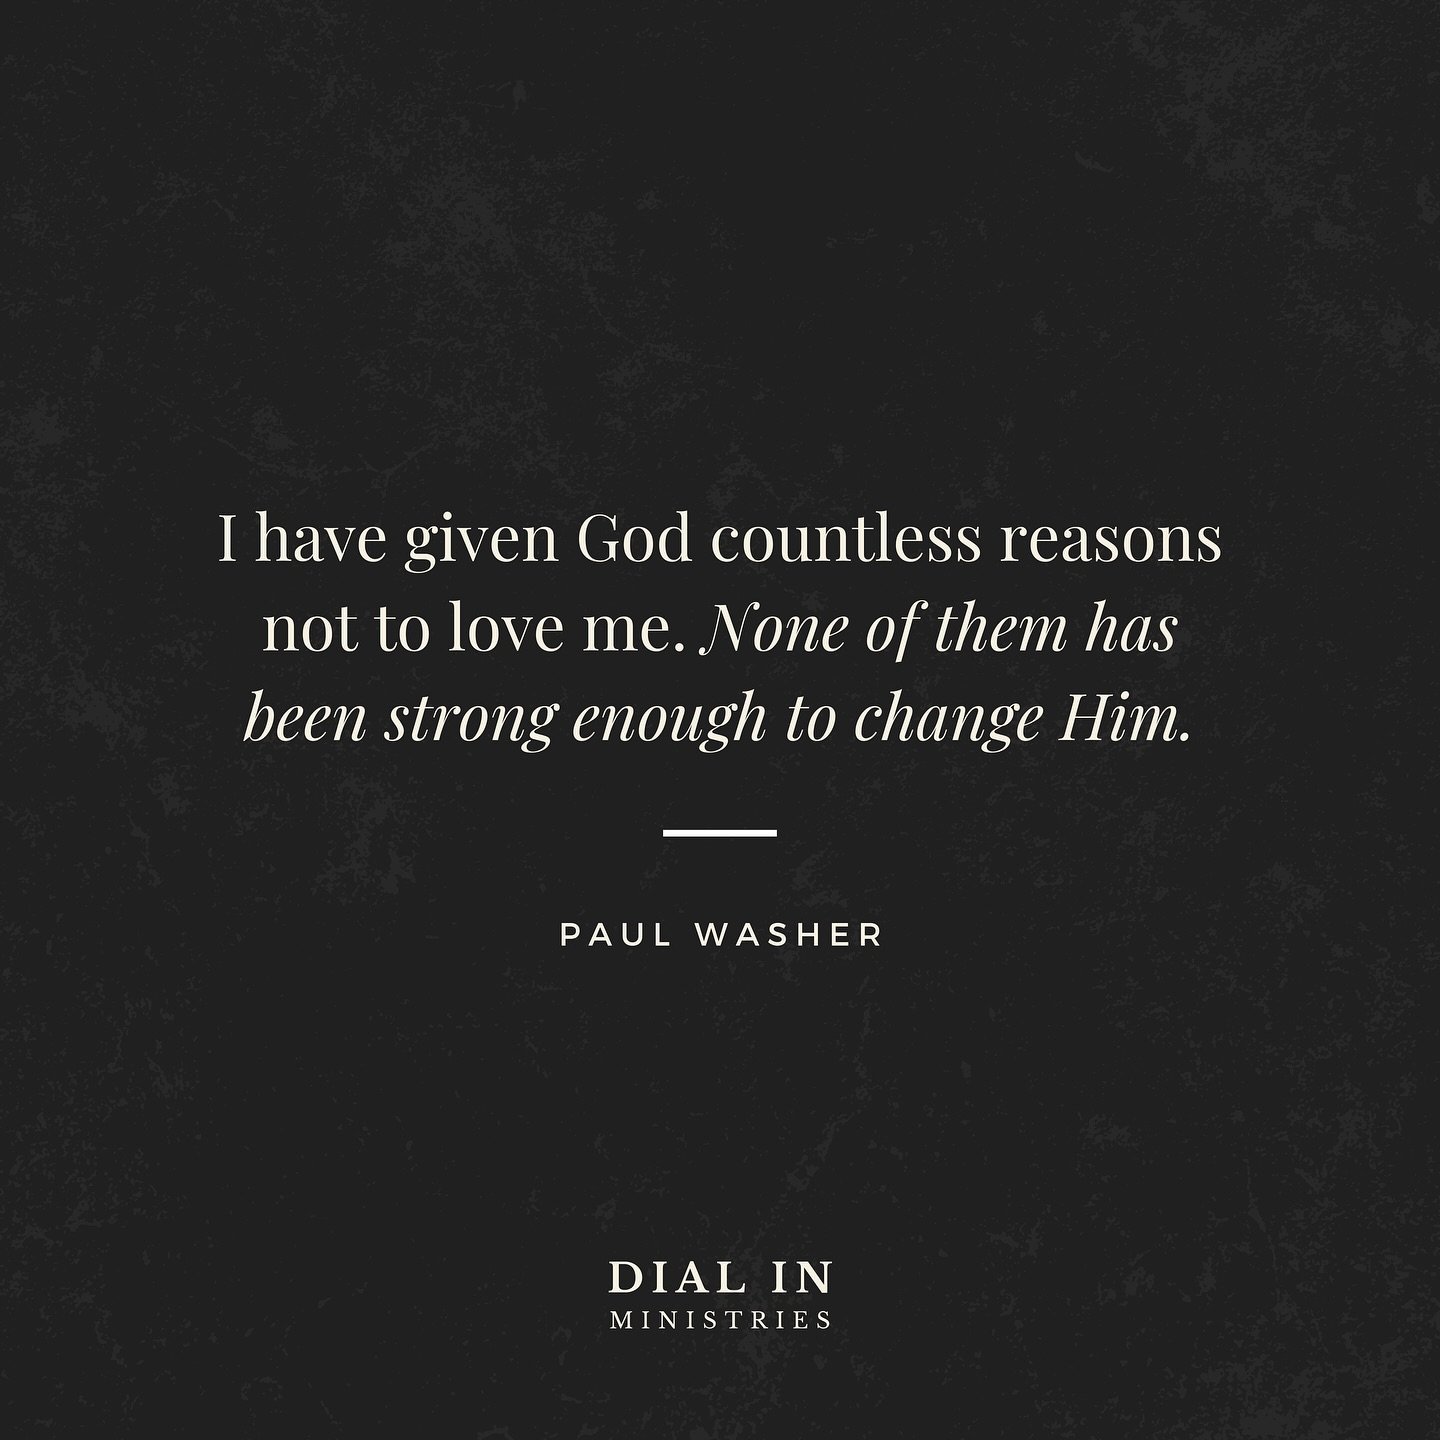 &ldquo;I have given God countless reasons not to love me. None of them has been strong enough to change Him.&rdquo;
&mdash; Paul Washer